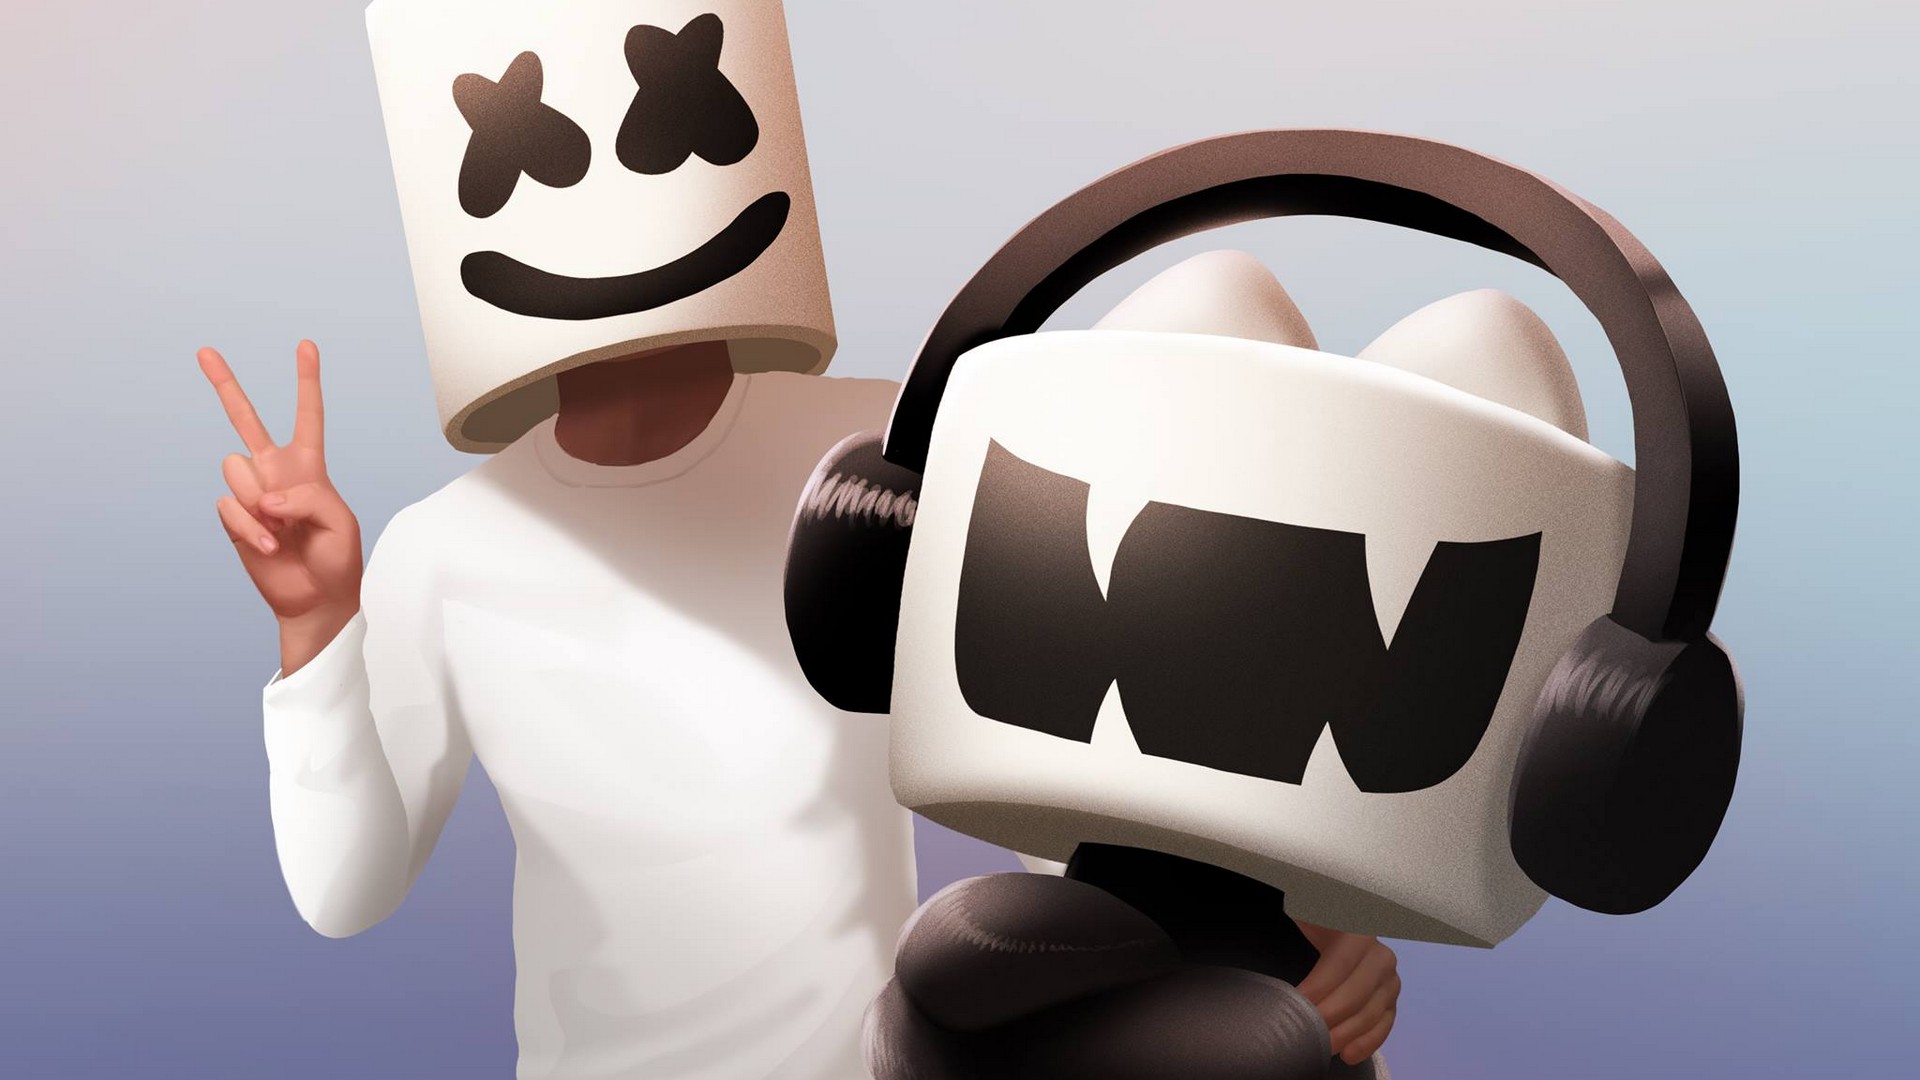 Wallpaper Marshmello With high-resolution 1920X1080 pixel. You can use this wallpaper for your Windows and Mac OS computers as well as your Android and iPhone smartphones